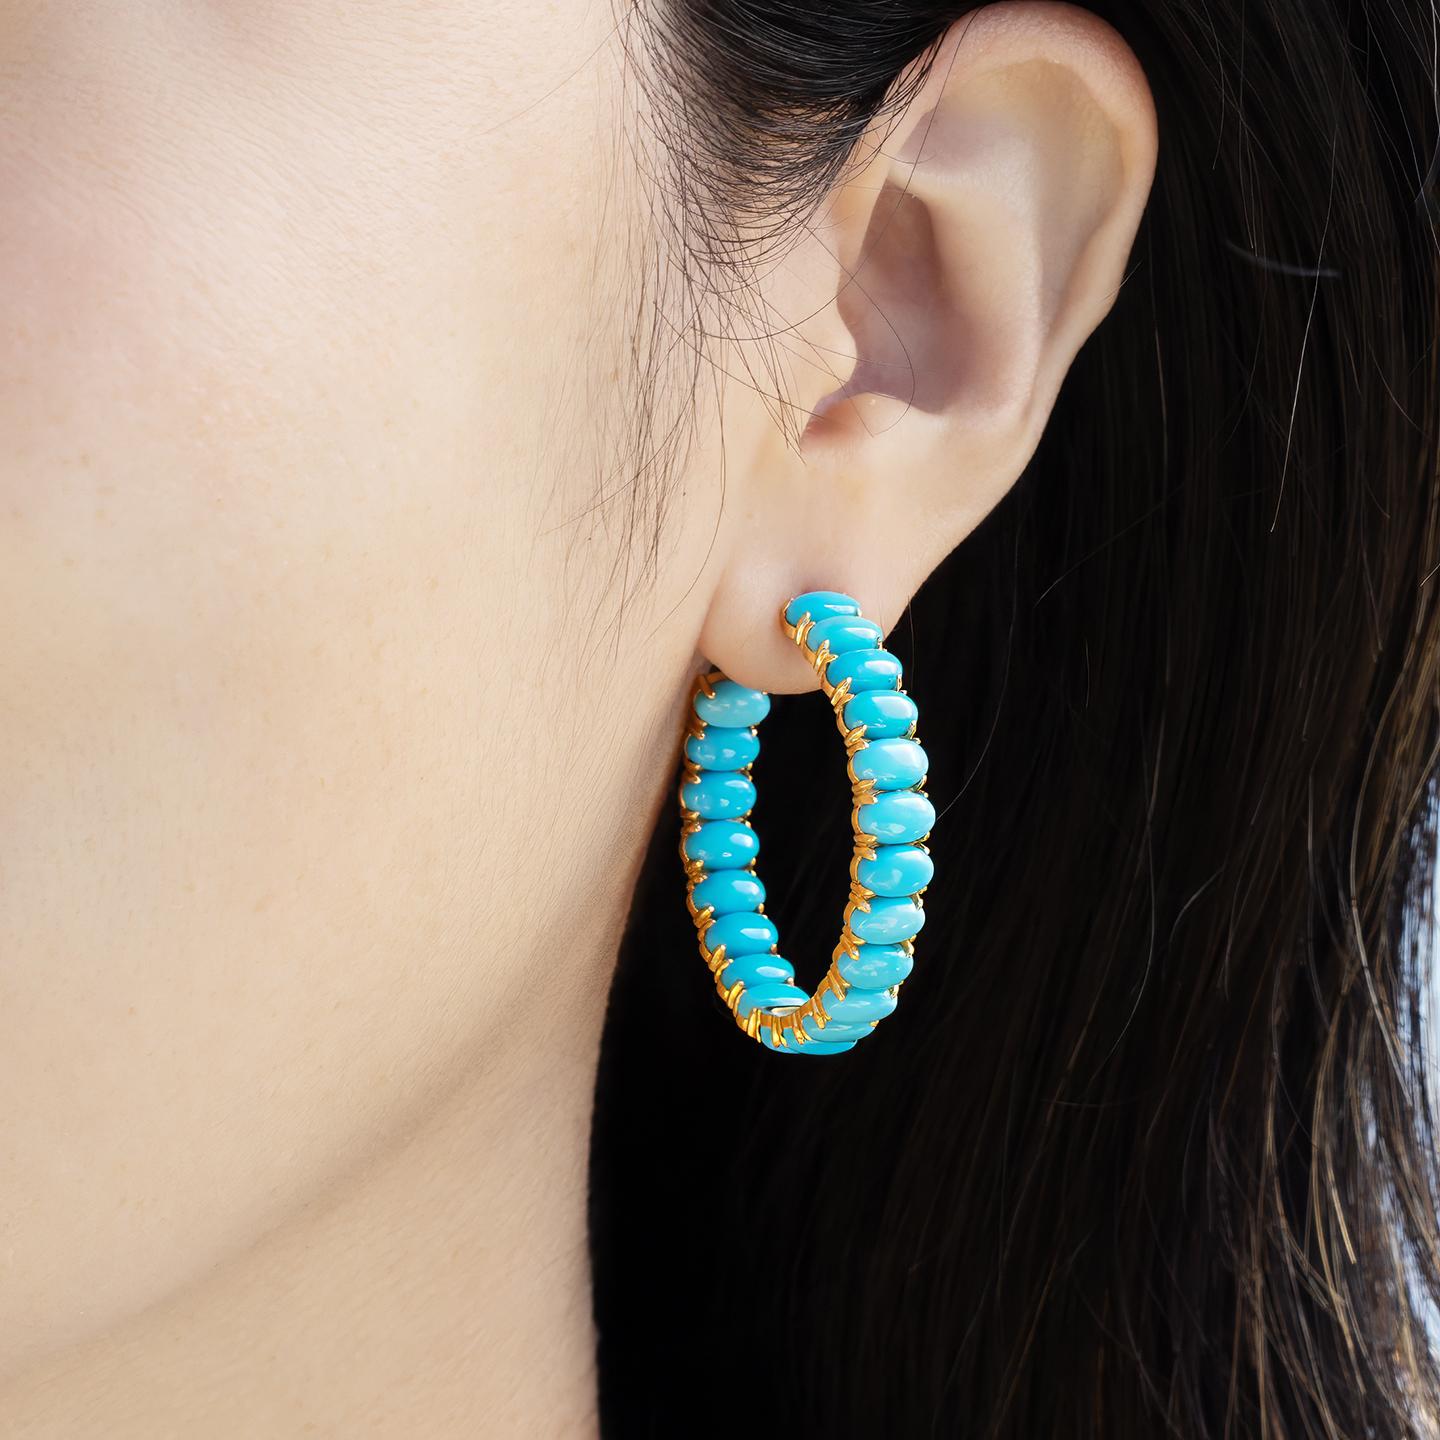 Arts and Crafts Nina Zhou 16ct Turquoise Inside-out Hoop Earrings For Sale